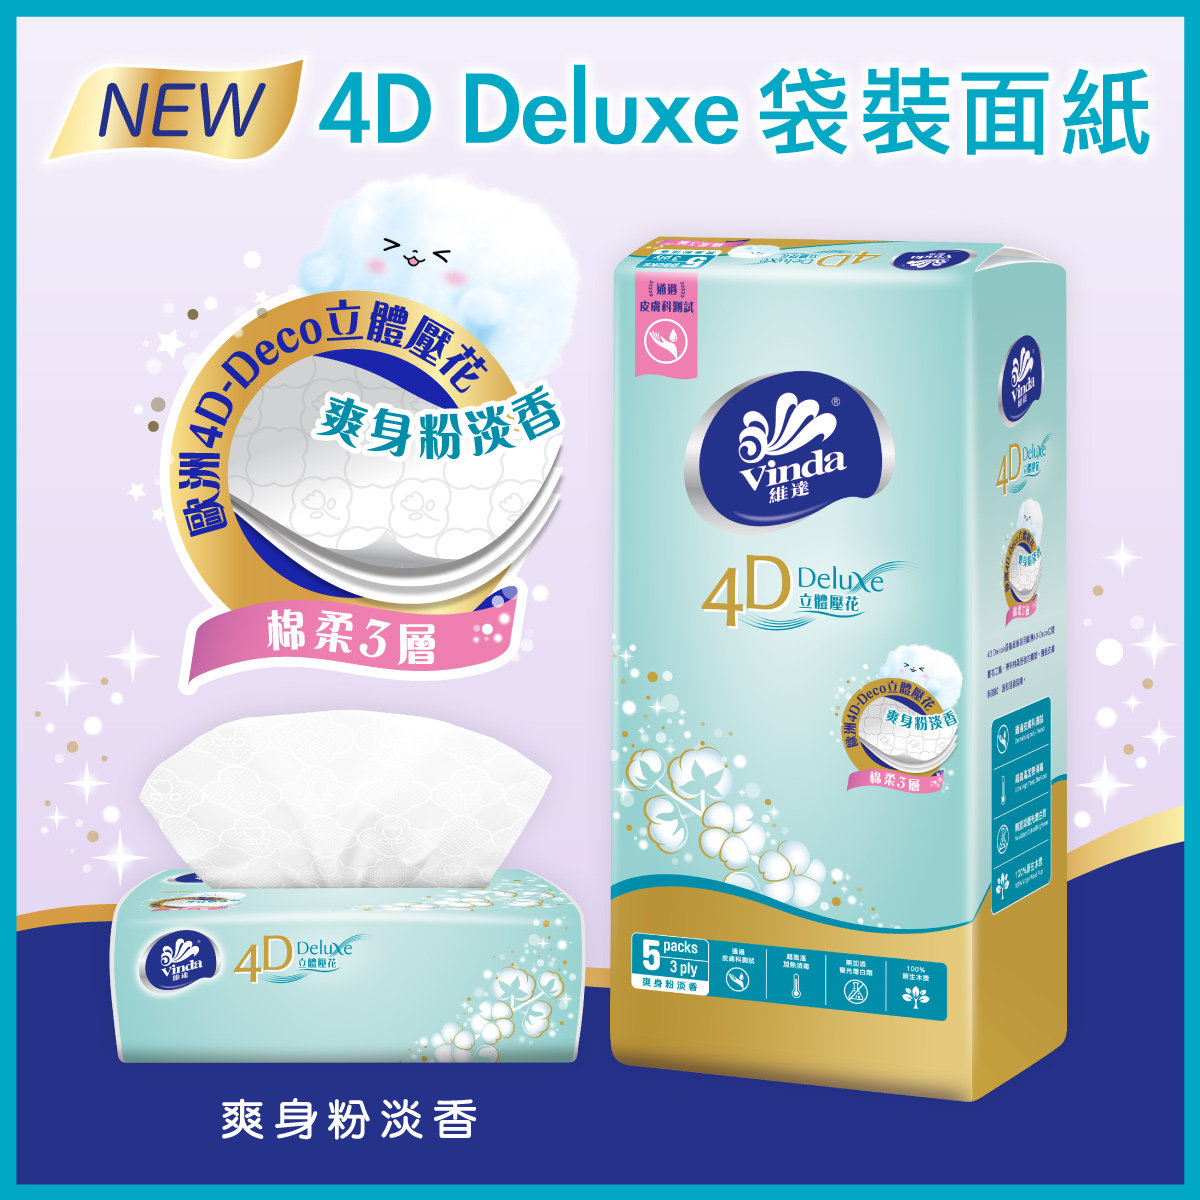 4D Deluxe Softpack Facial Tissue (Baby Soft)